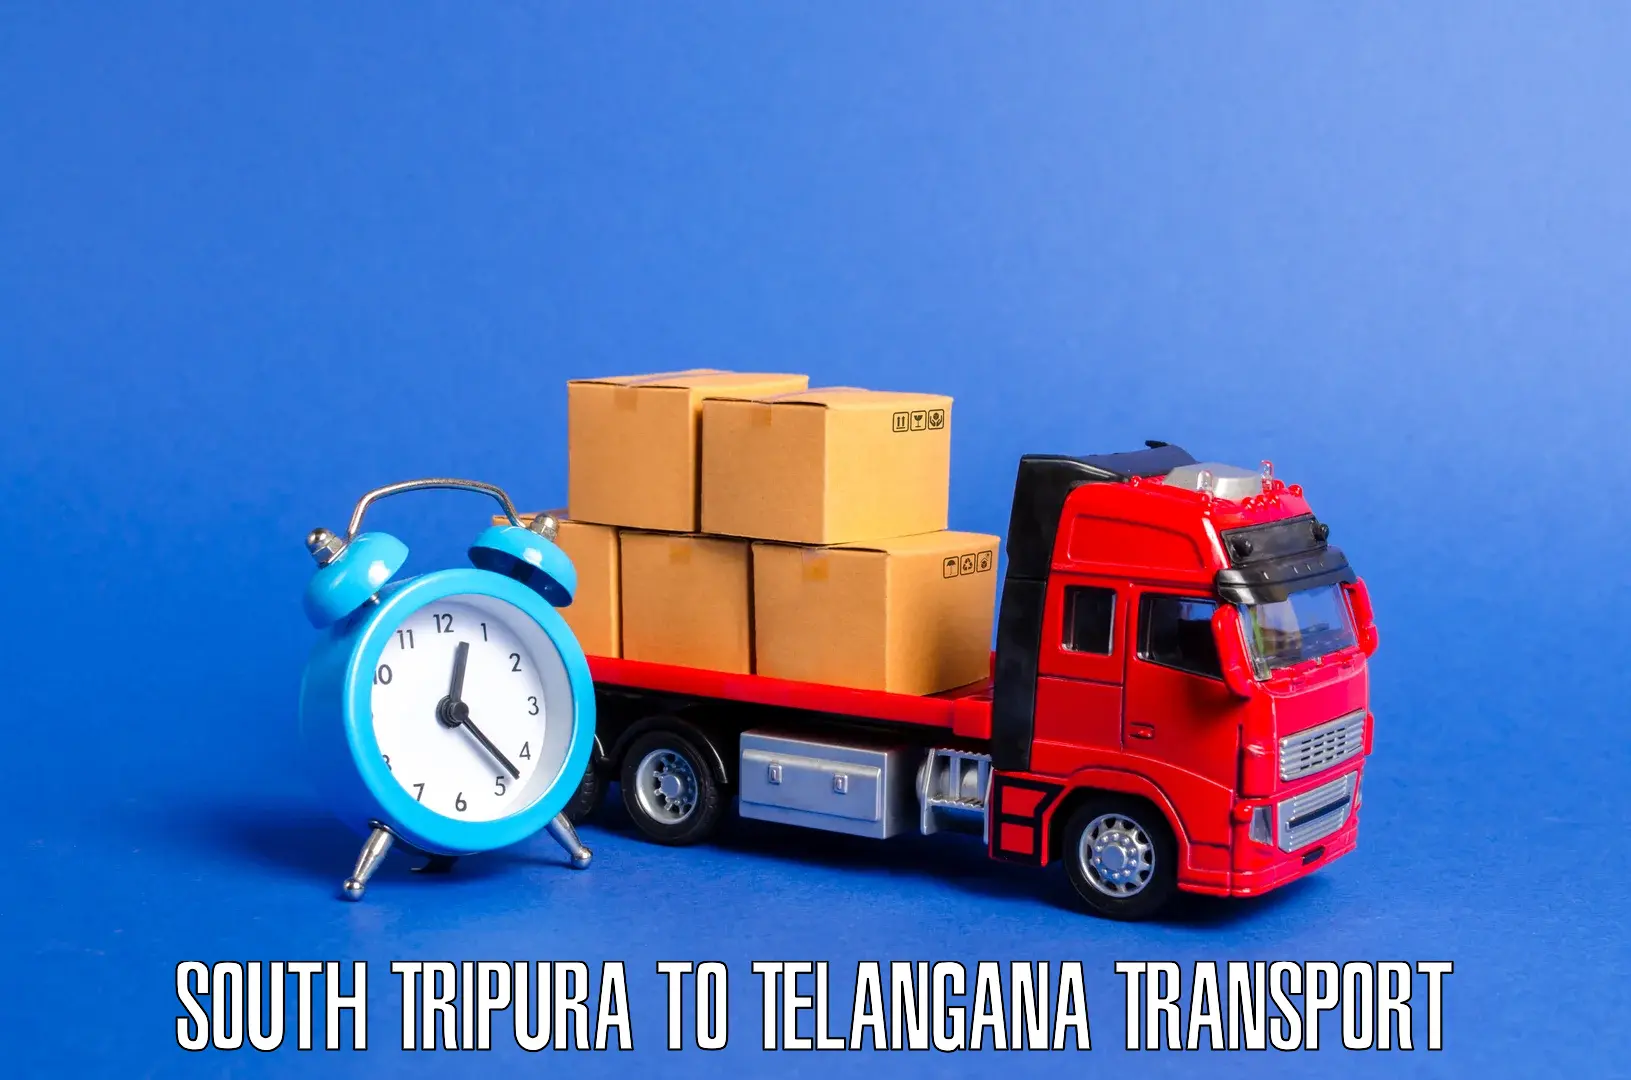 Container transport service South Tripura to Kalwakurthy